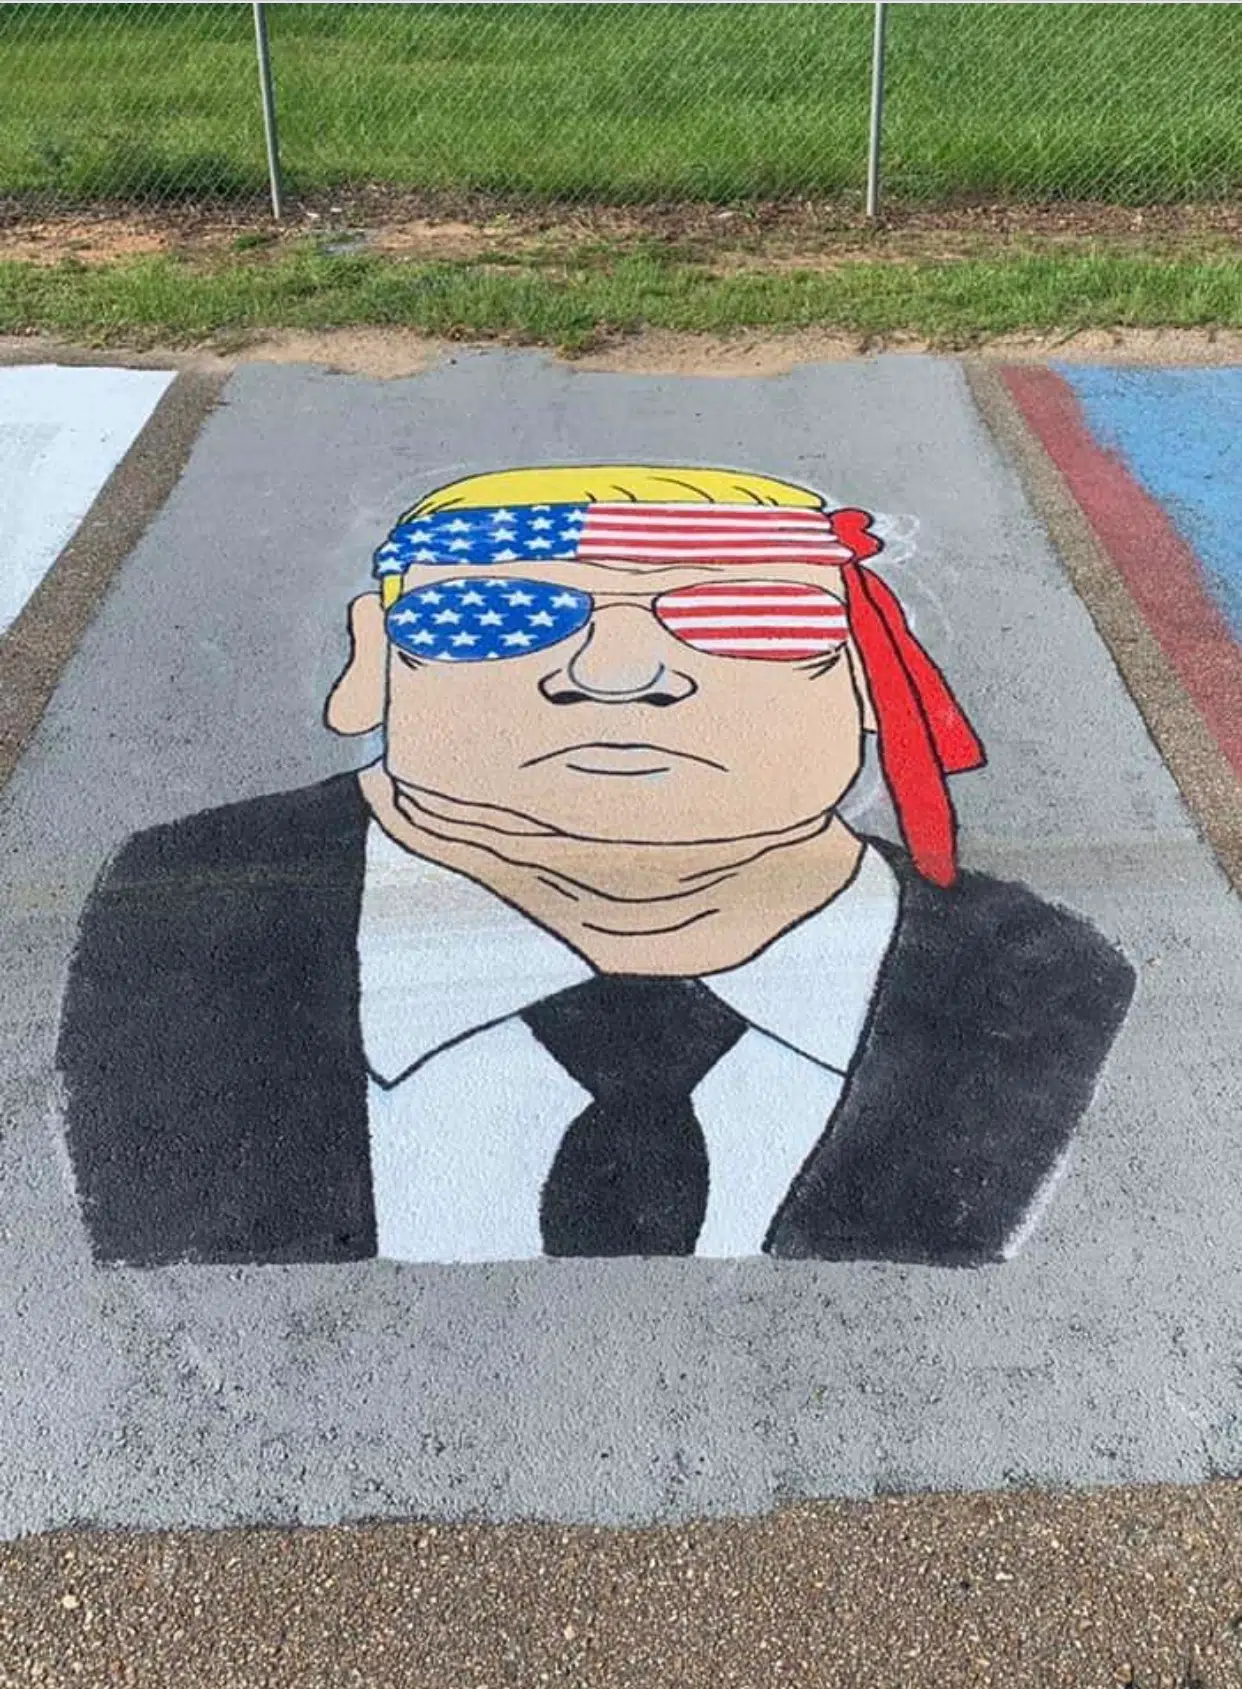 Trump painting controversy sees legal action from a Washington Parish high school student